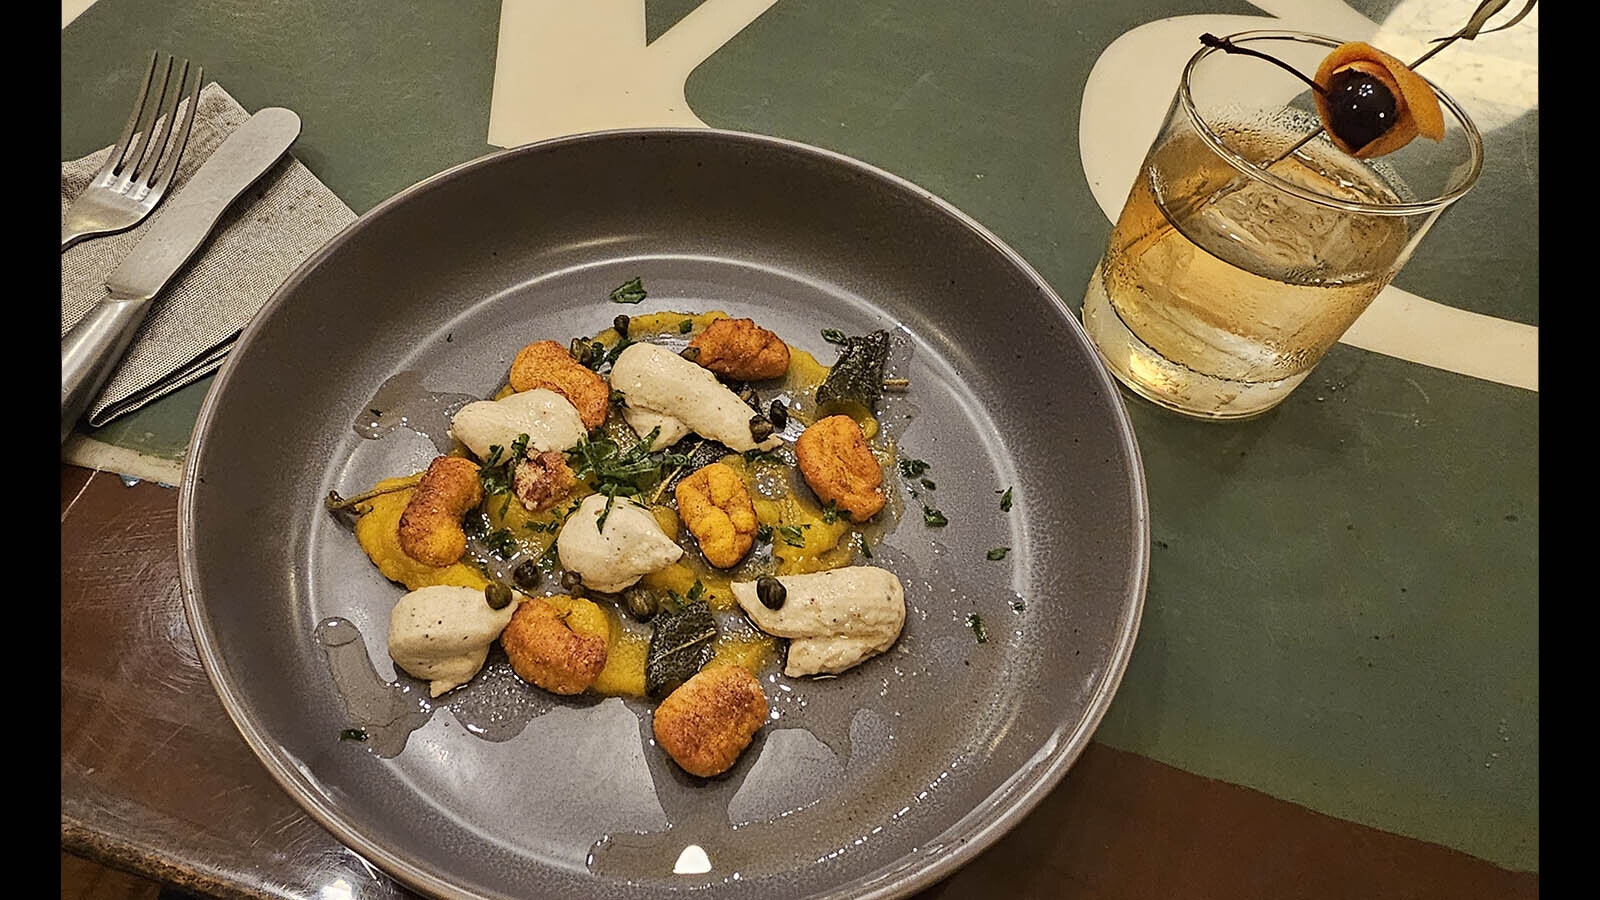 An artistic plate of gnocchi, with delicious cashew cream and butternut squash puree, drizzled with browned butter and dark green flecks of sage, accompanied with an old-fashioned cocktail. Despite having only vegetables, the dish was incredibly satisfying and filling.